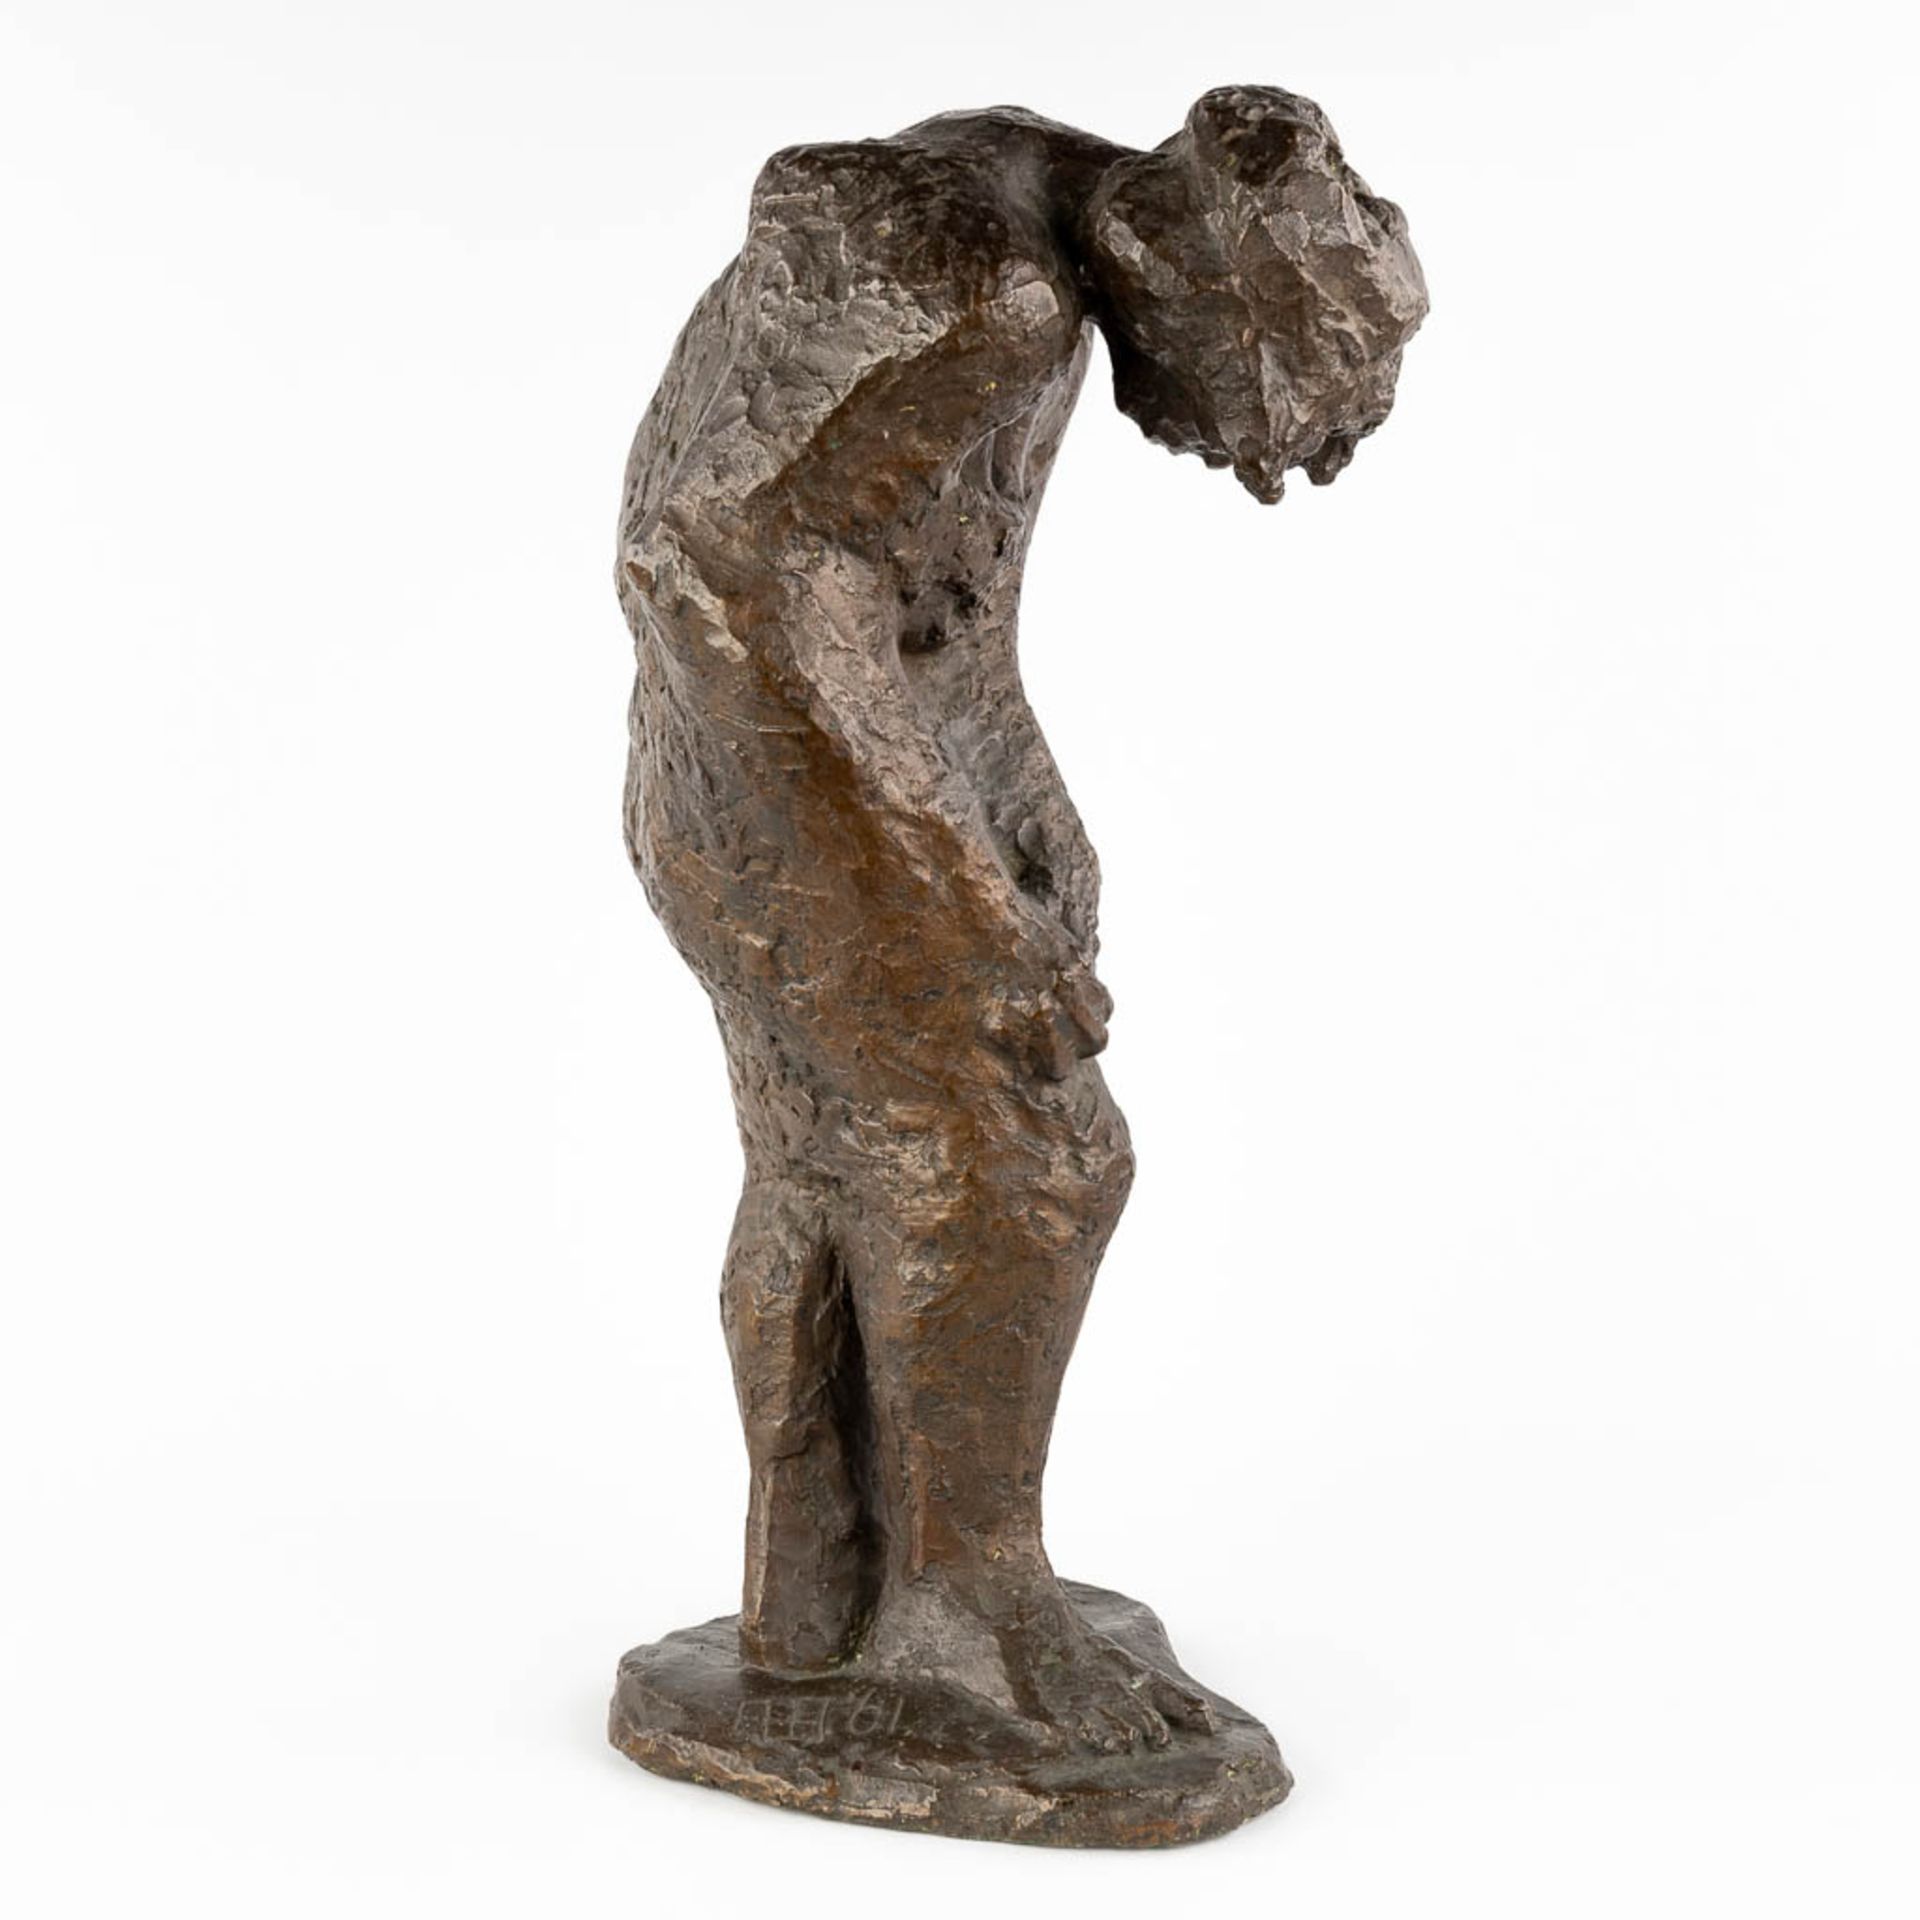 Leaning woman, a figurine, patinated bronze, probably cire perdue. Mongrammed. (H:59 cm) - Image 4 of 13